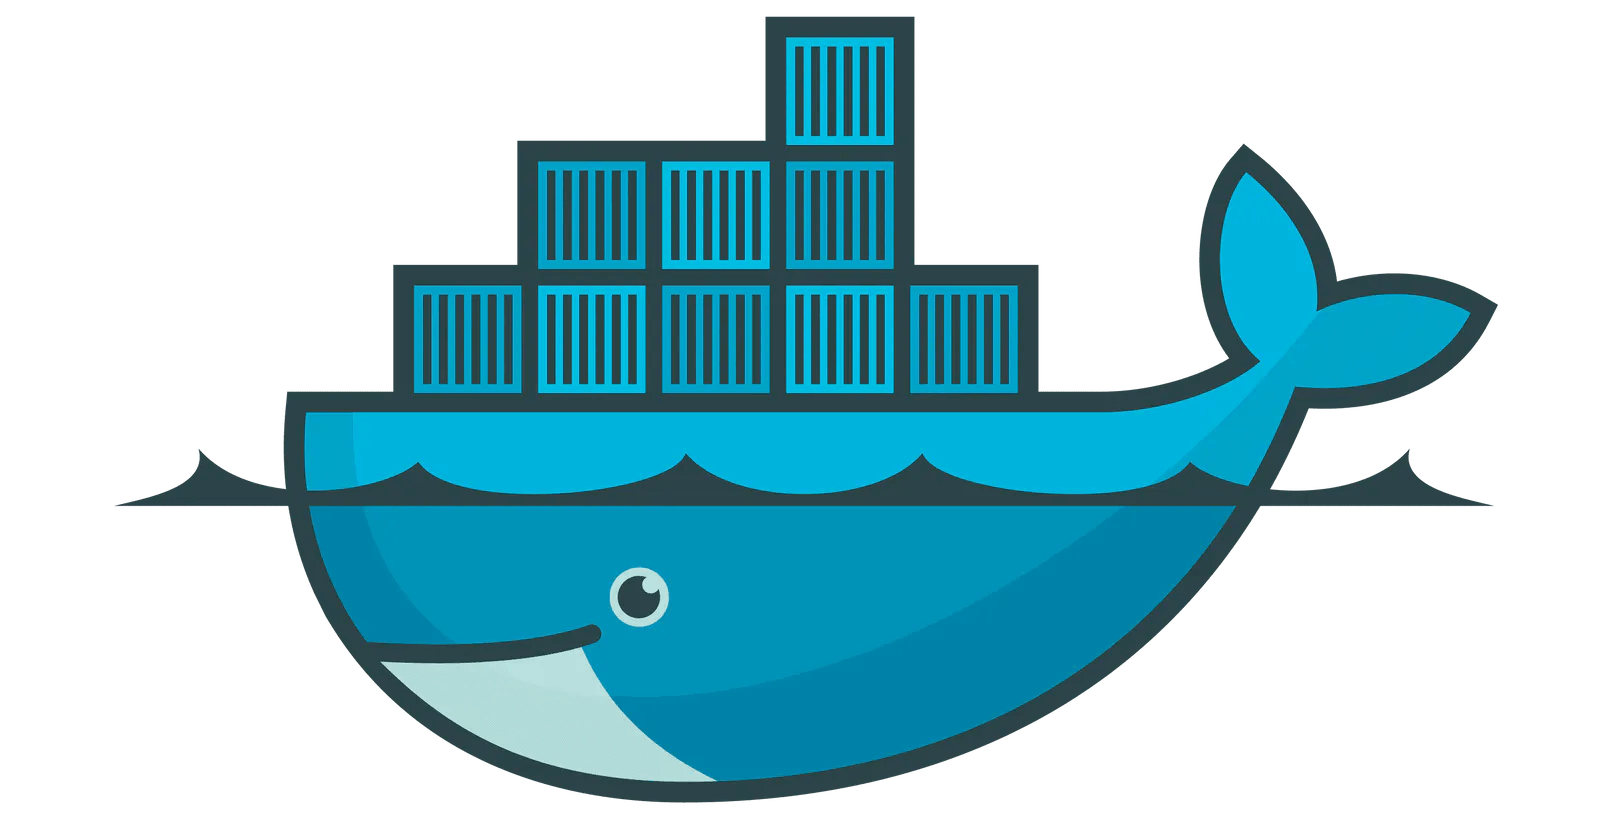 Why to use Docker?